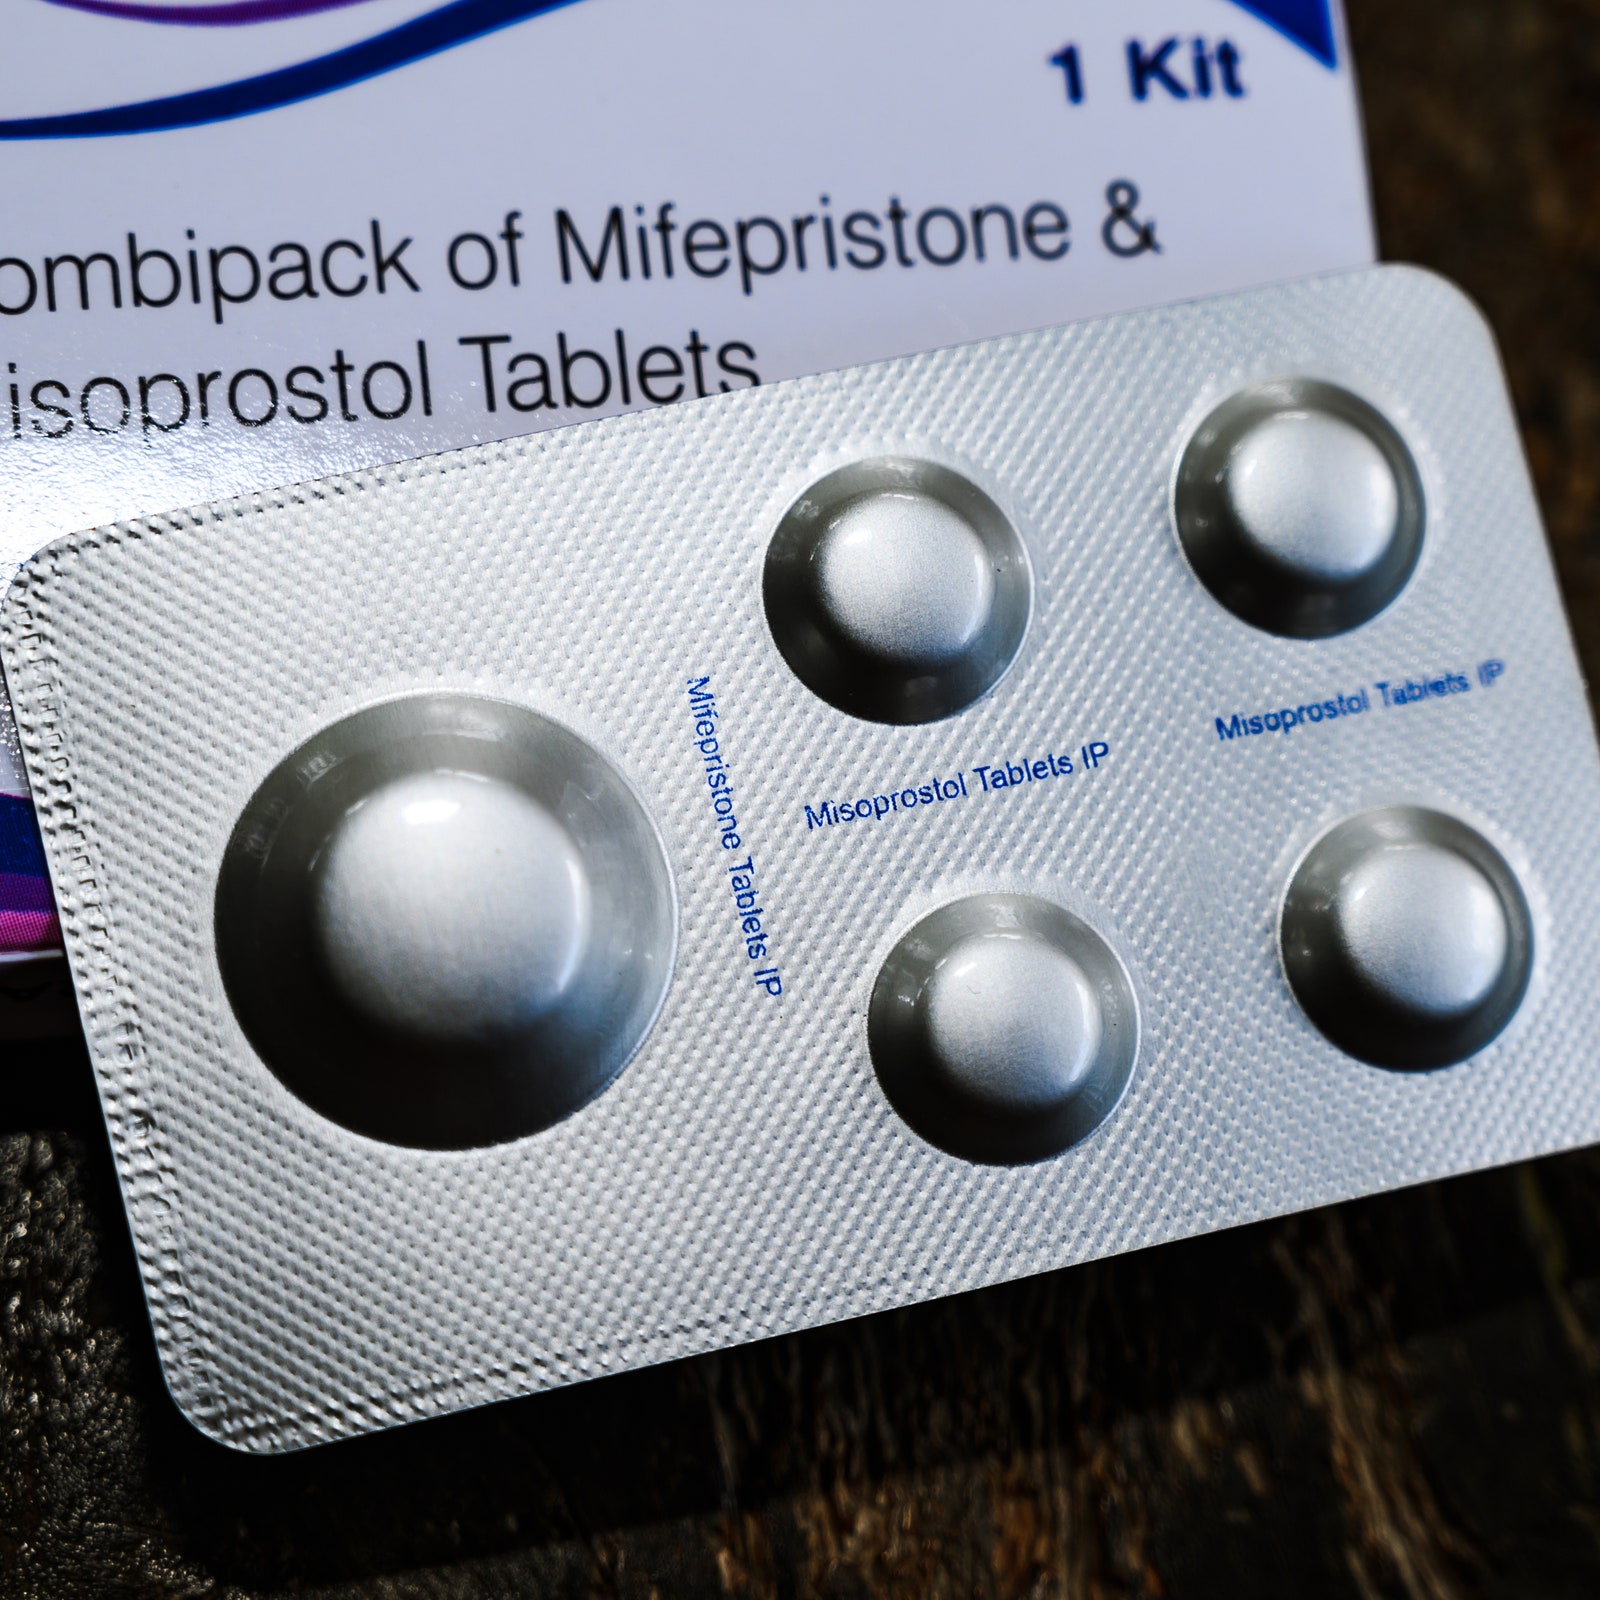 The Supreme Court Will Consider a Case on the Abortion Pill